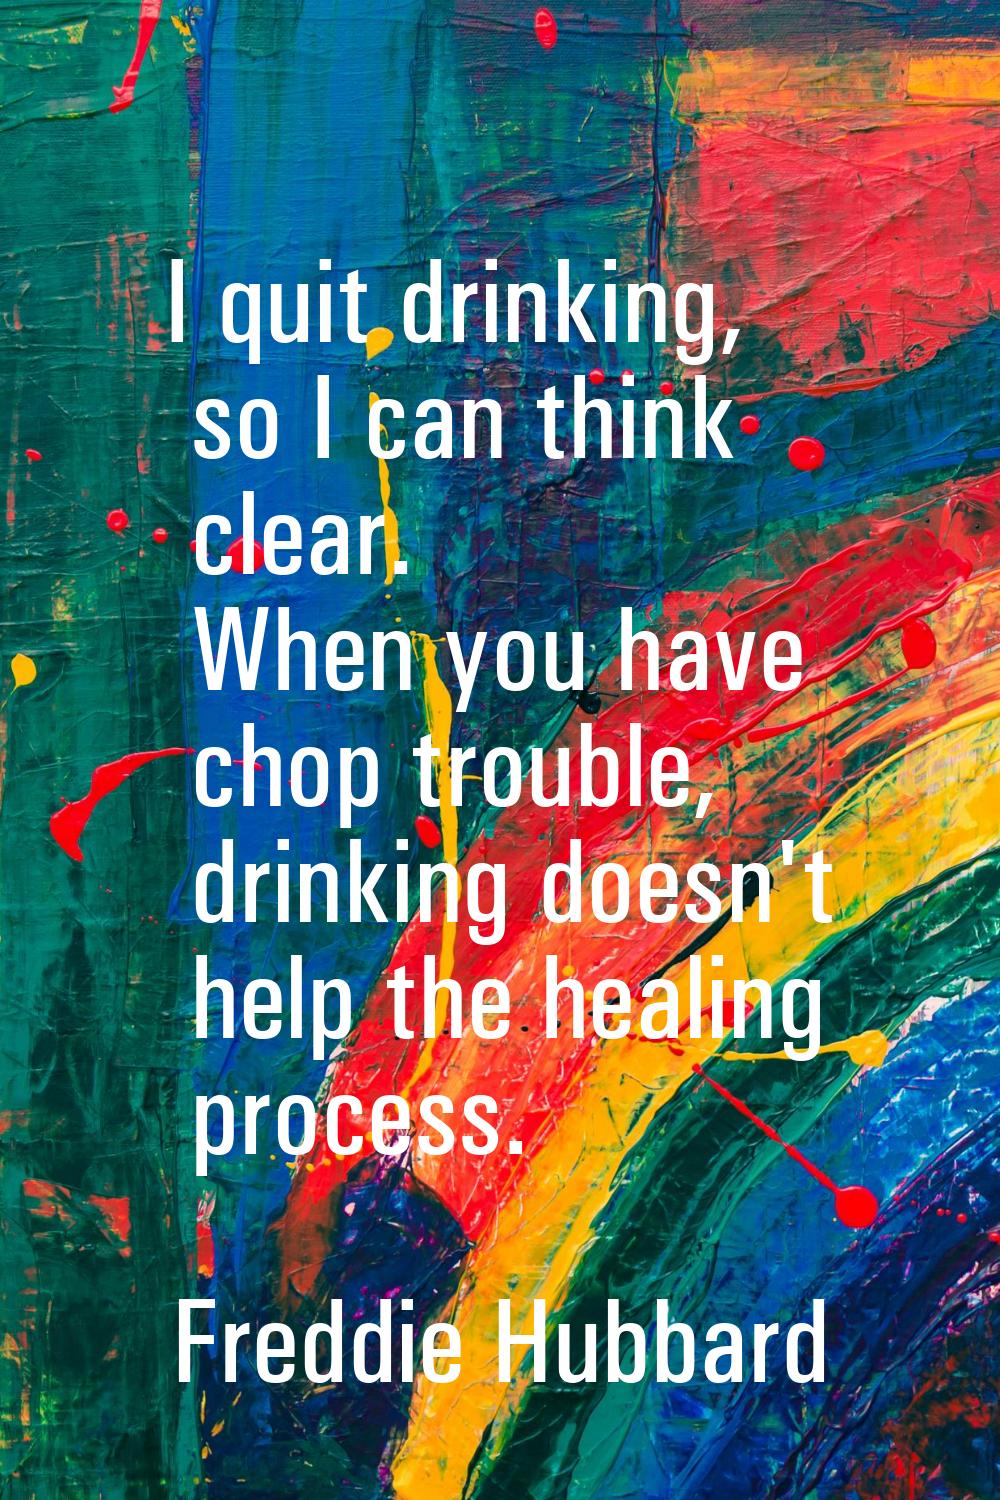 I quit drinking, so I can think clear. When you have chop trouble, drinking doesn't help the healin